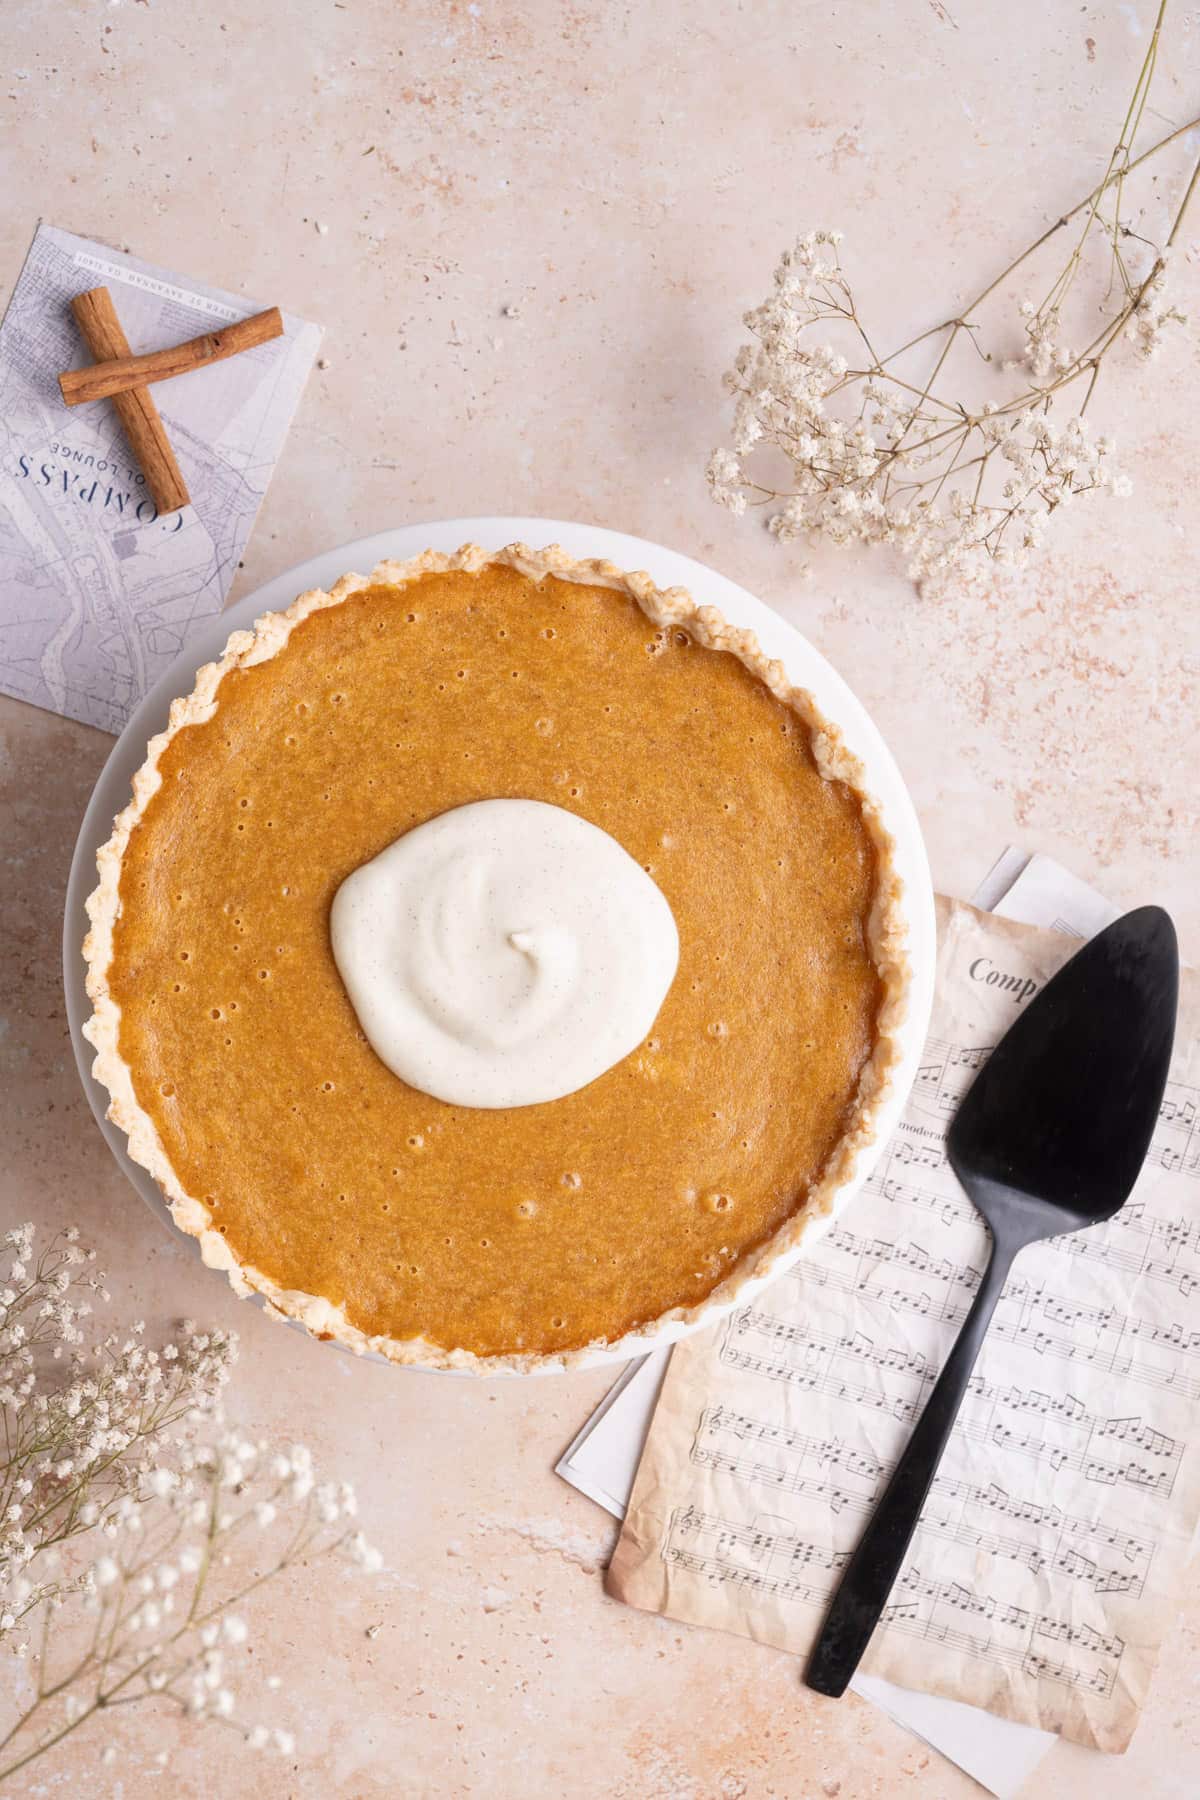 Whole sweet potato pie with whipped topping in the center.